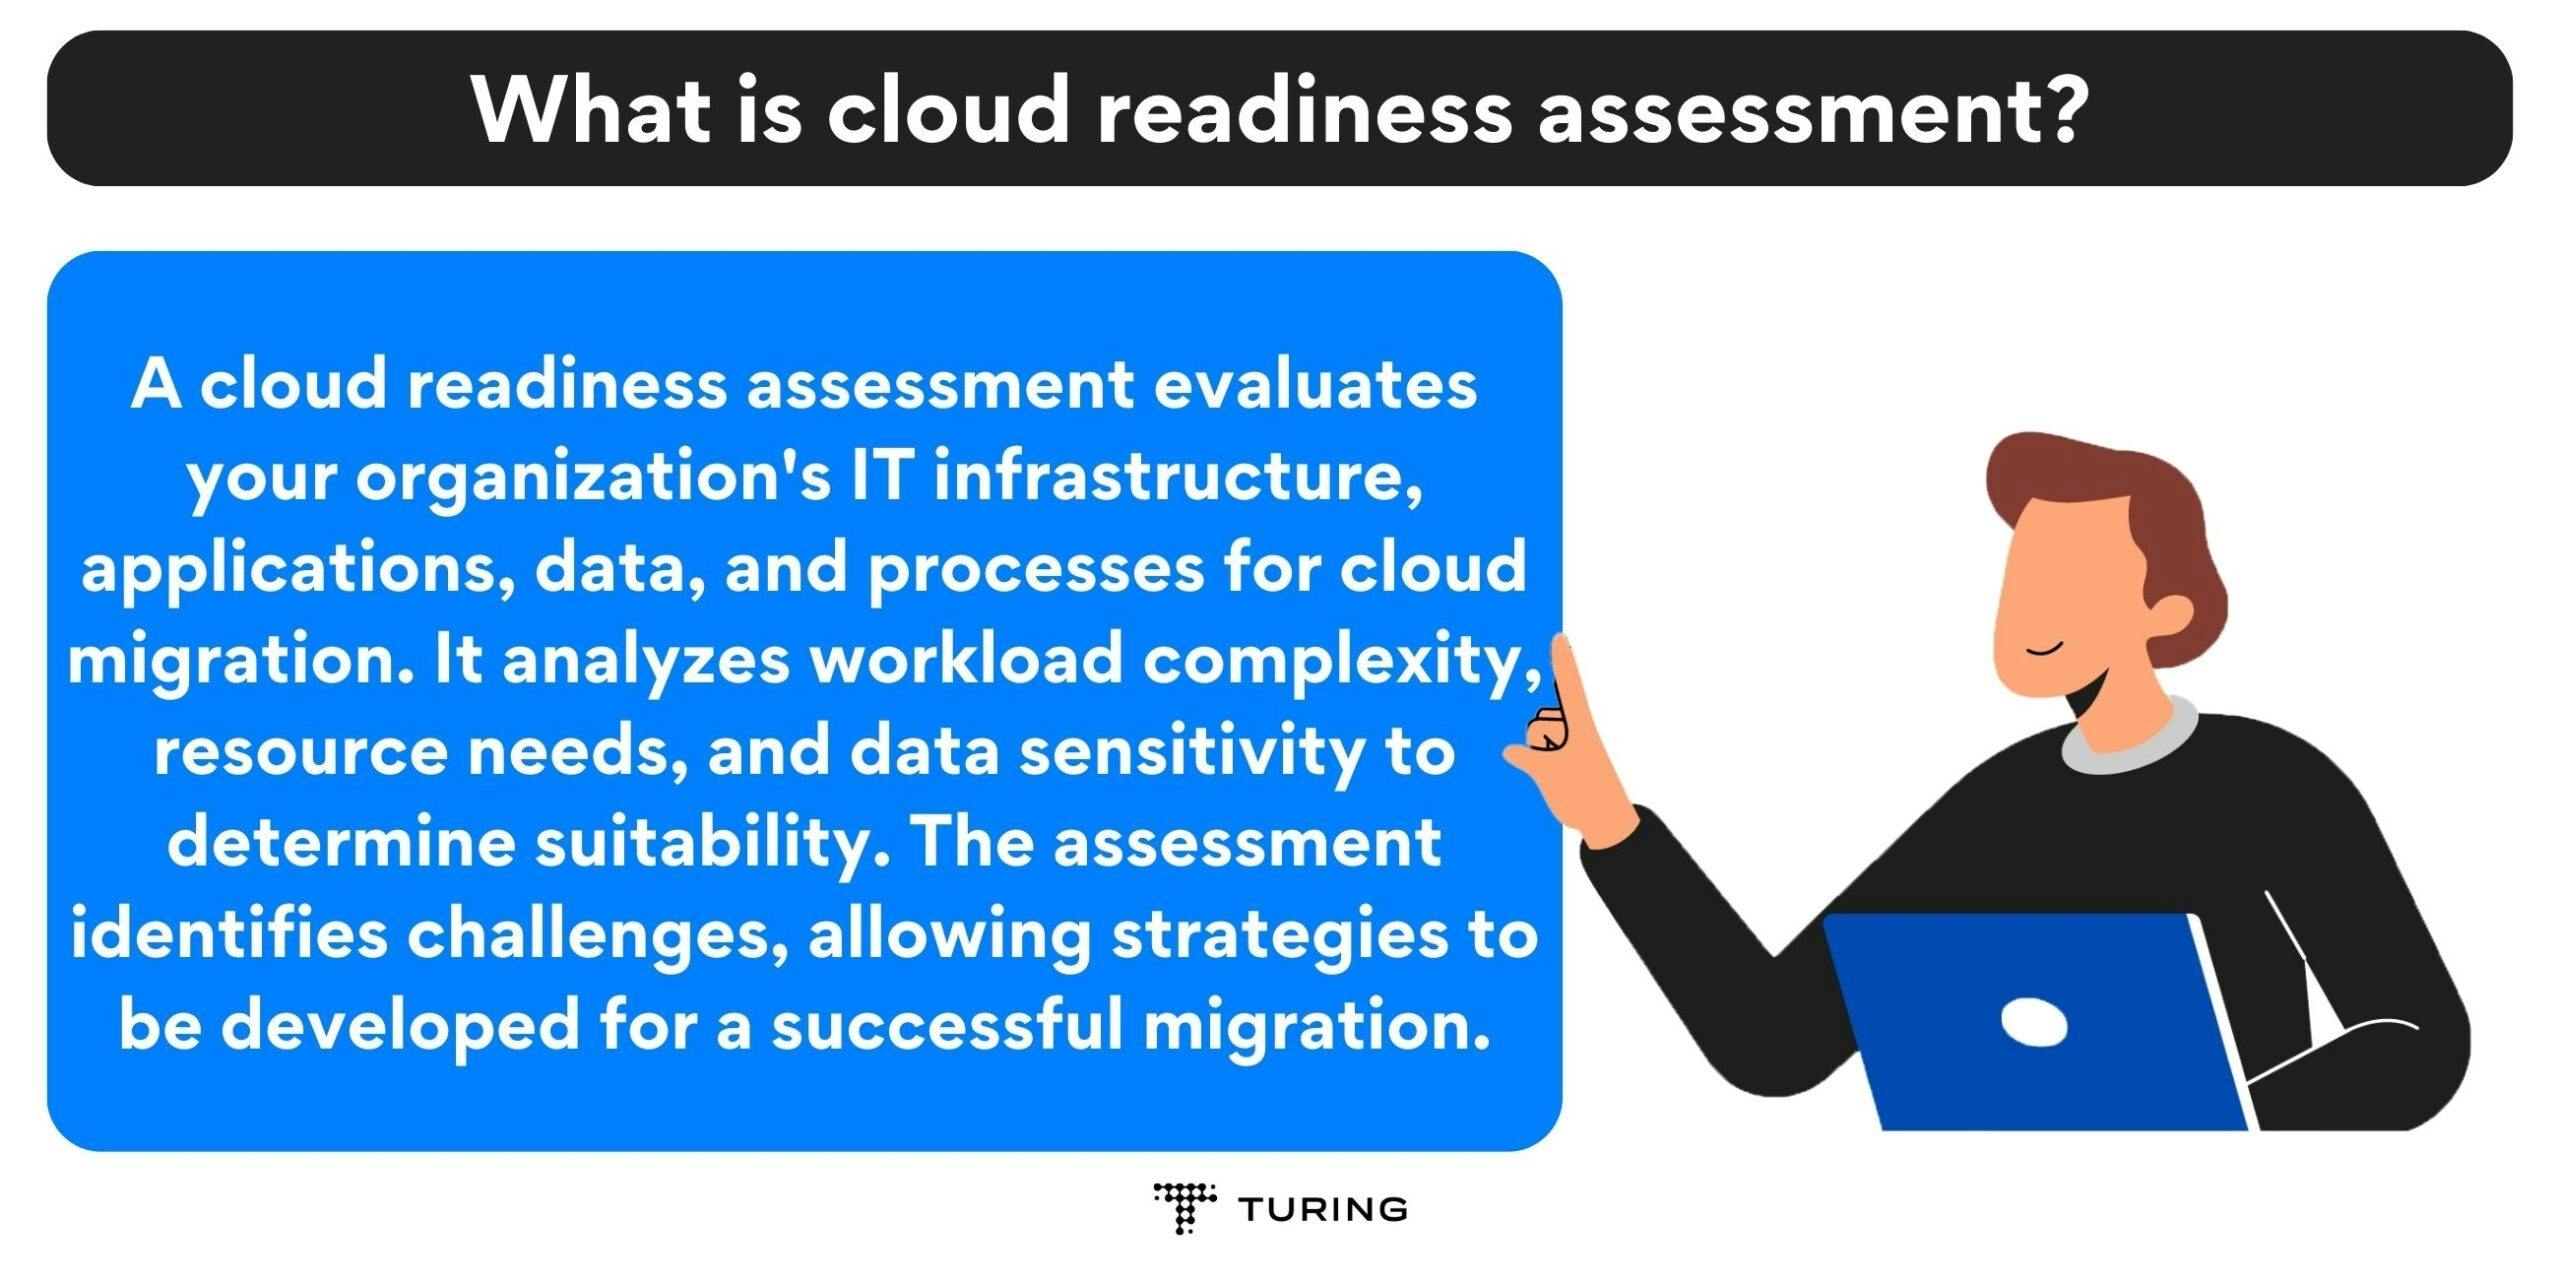 What is cloud readiness assessment